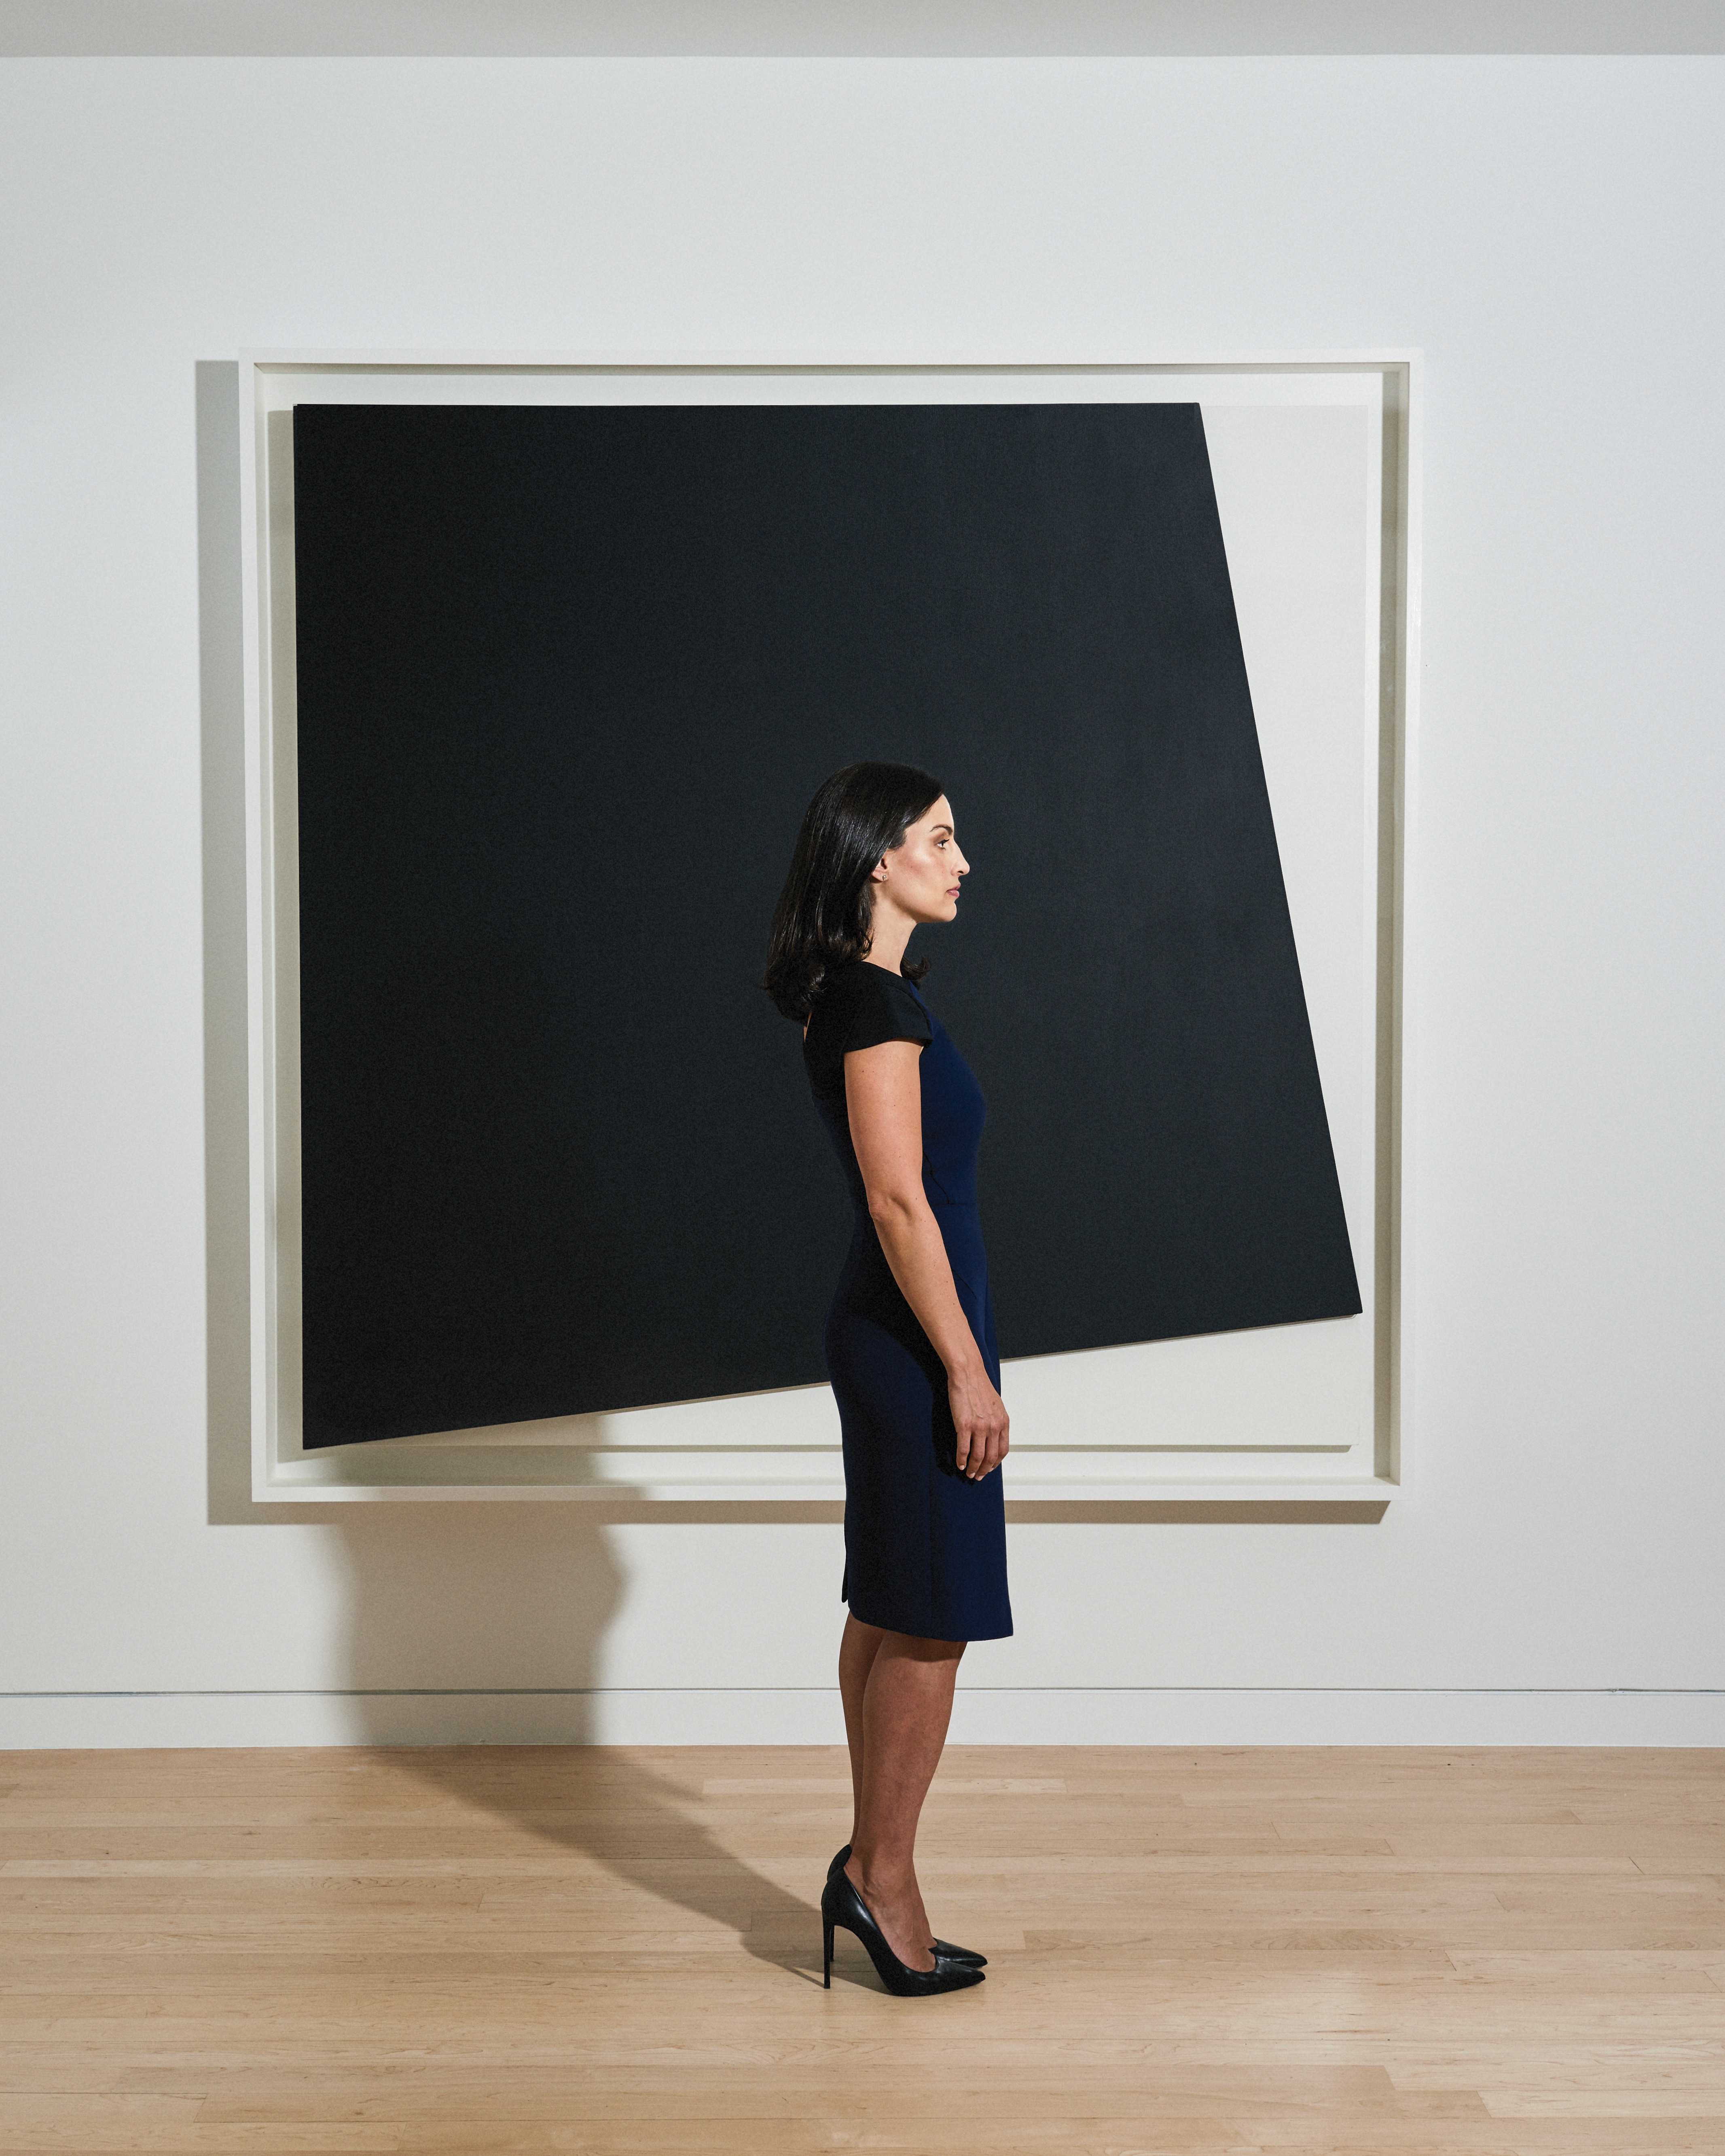 The FLAG Art Foundation Director Stephanie Roach in front of Ellsworth Kelly’s Black Relief with White, 2005, at Gagosian Gallery. Portrait by Kyle Dorosz. 